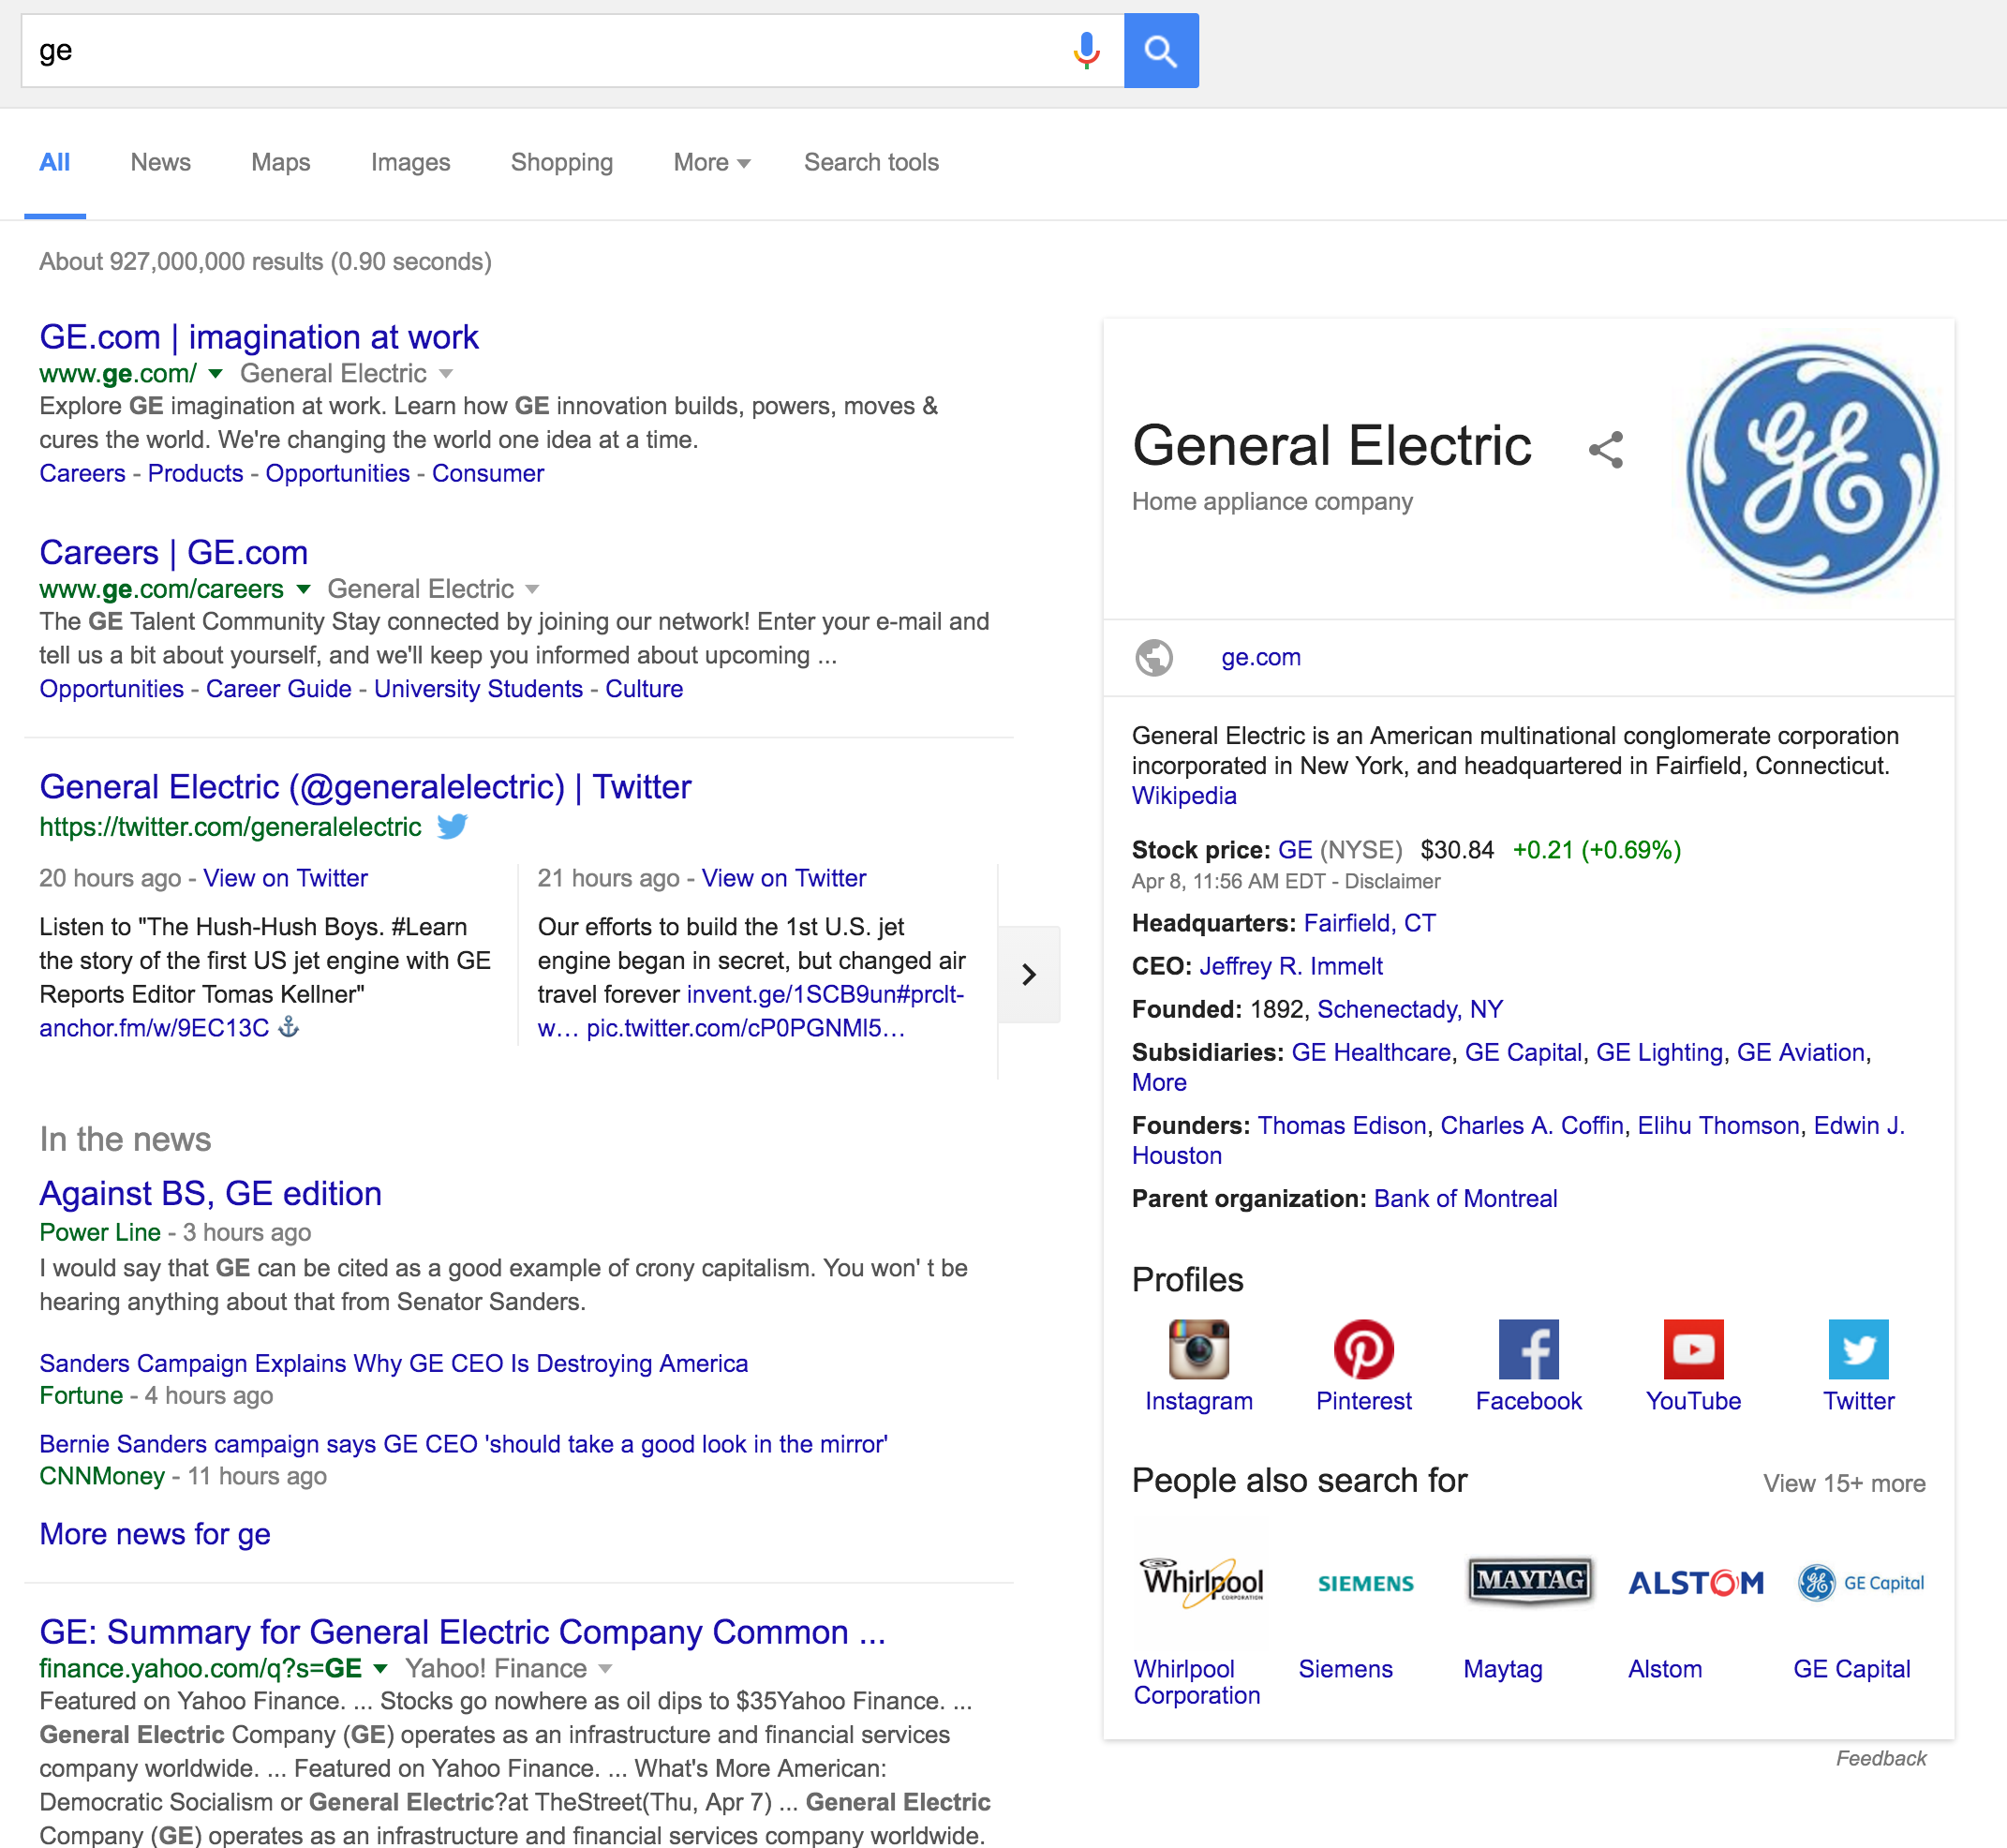  Example of a company with "full SERP real estate coverage" on Google.